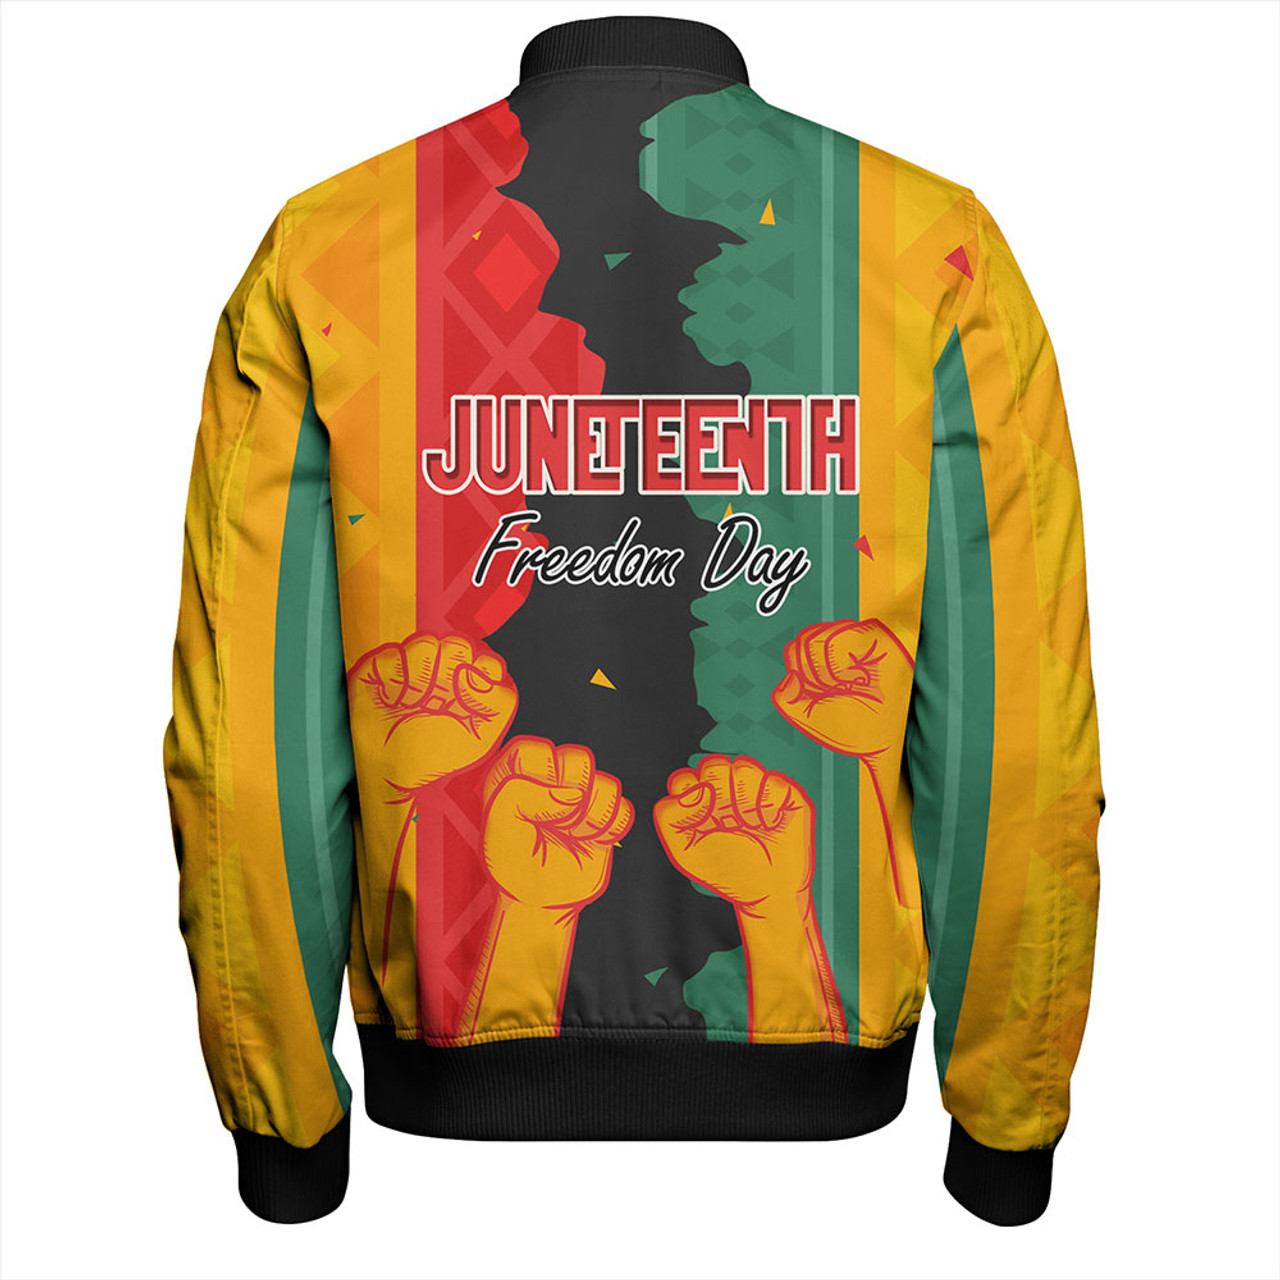 Juneteenth Bomber Jacket - Freedom Day Powers Hand